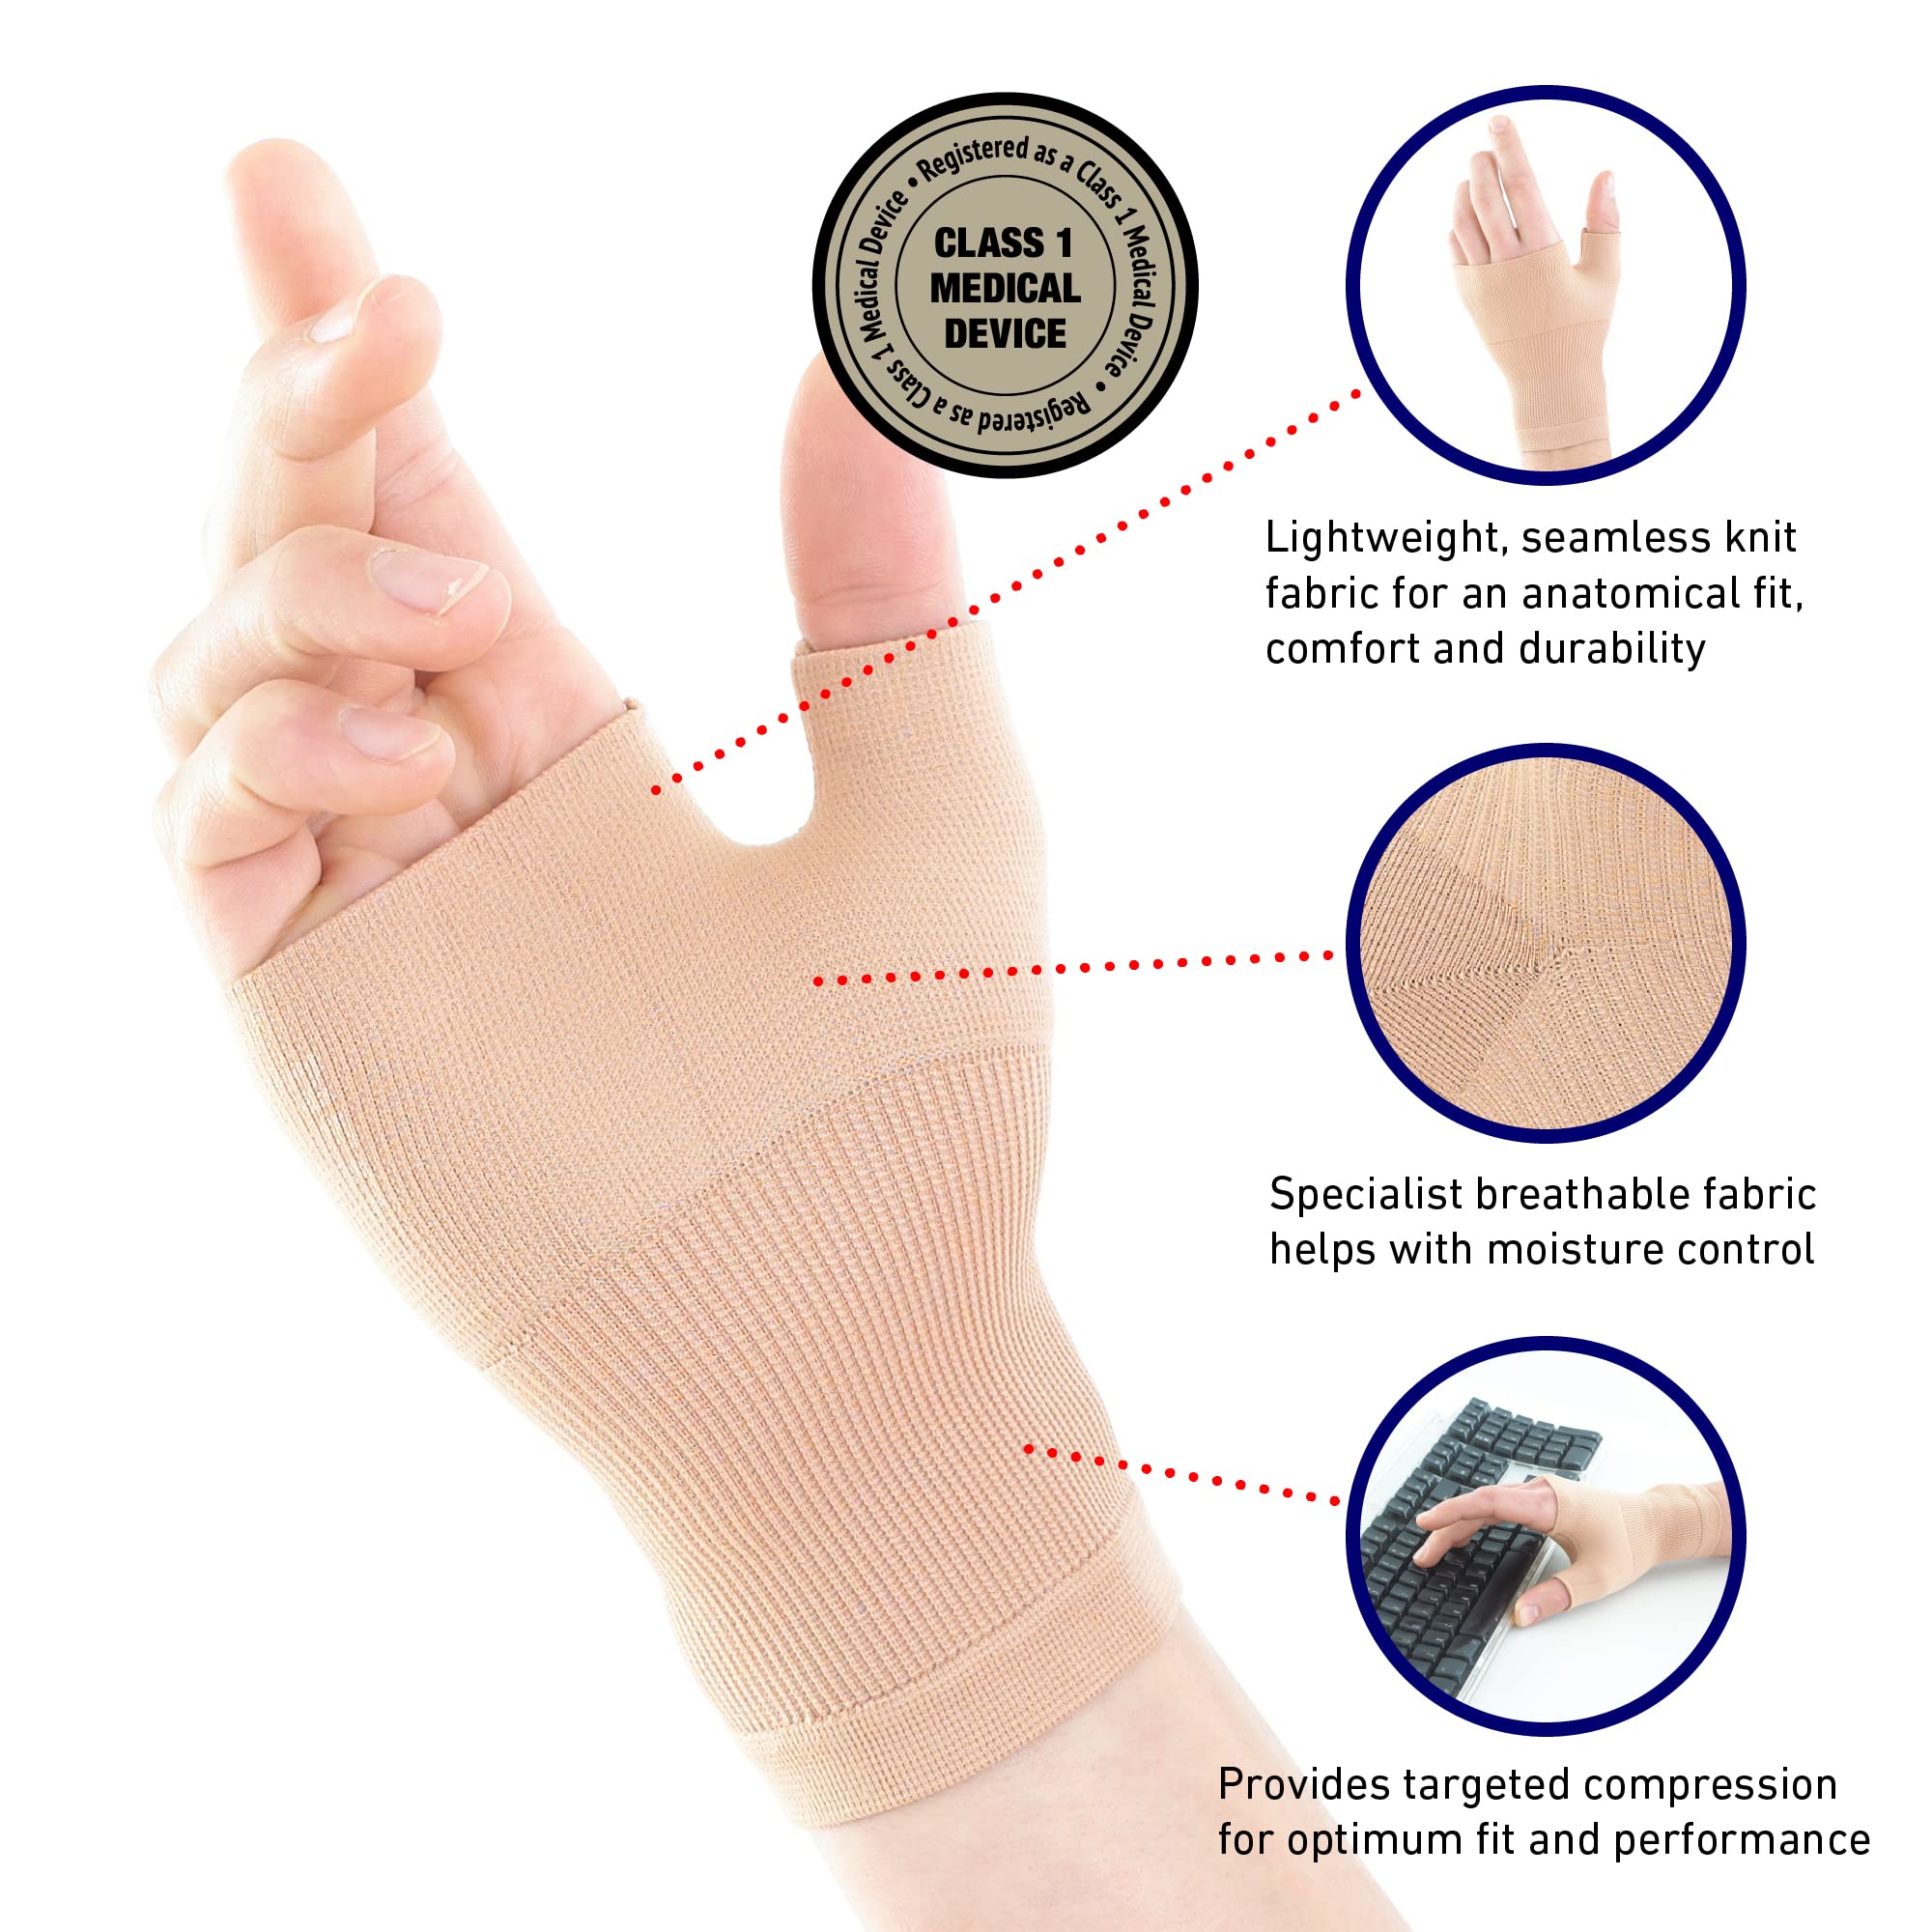 Neo-G Airflow Thumb and Wrist Support For Joint Pain, Tendonitis, Sprain, Hand Instability. Compression Wrist Sleeves with Thumb Support - S - Beige